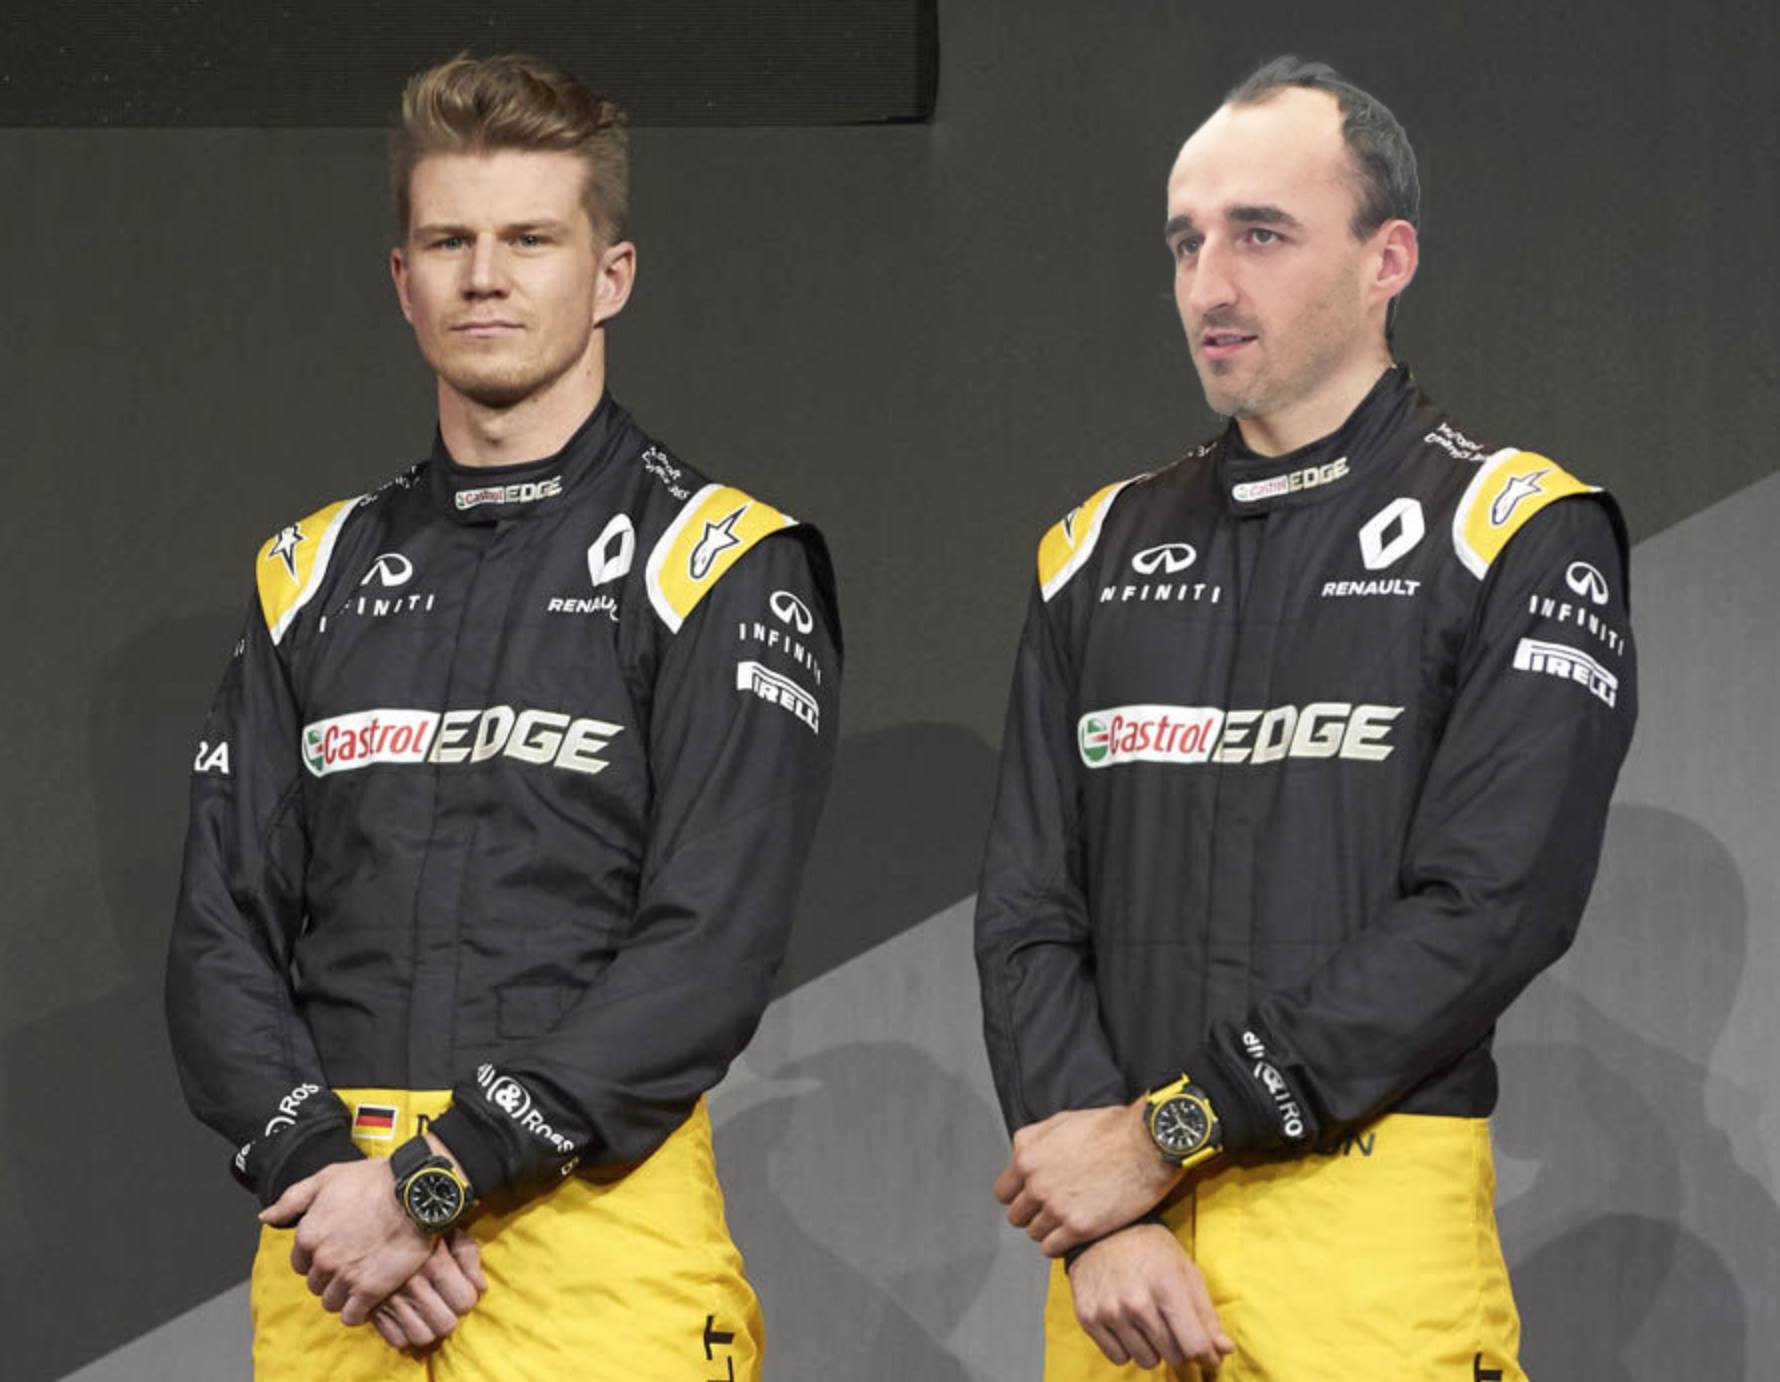 2017 Canadian GP Preview - A Kubica Comeback?